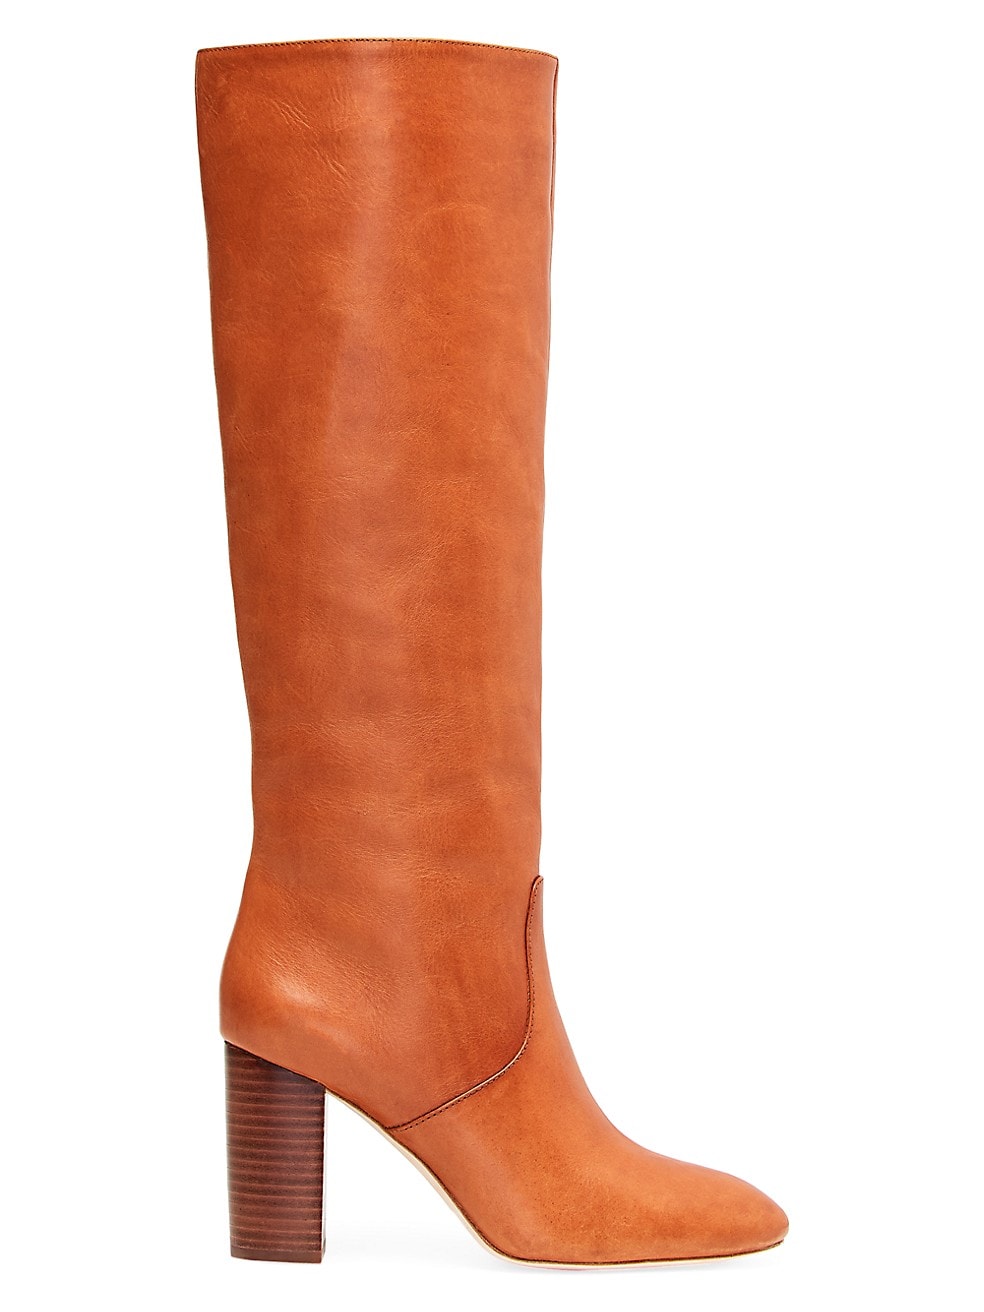 Loeffler Randall Goldy Boots Review • BrightonTheDay